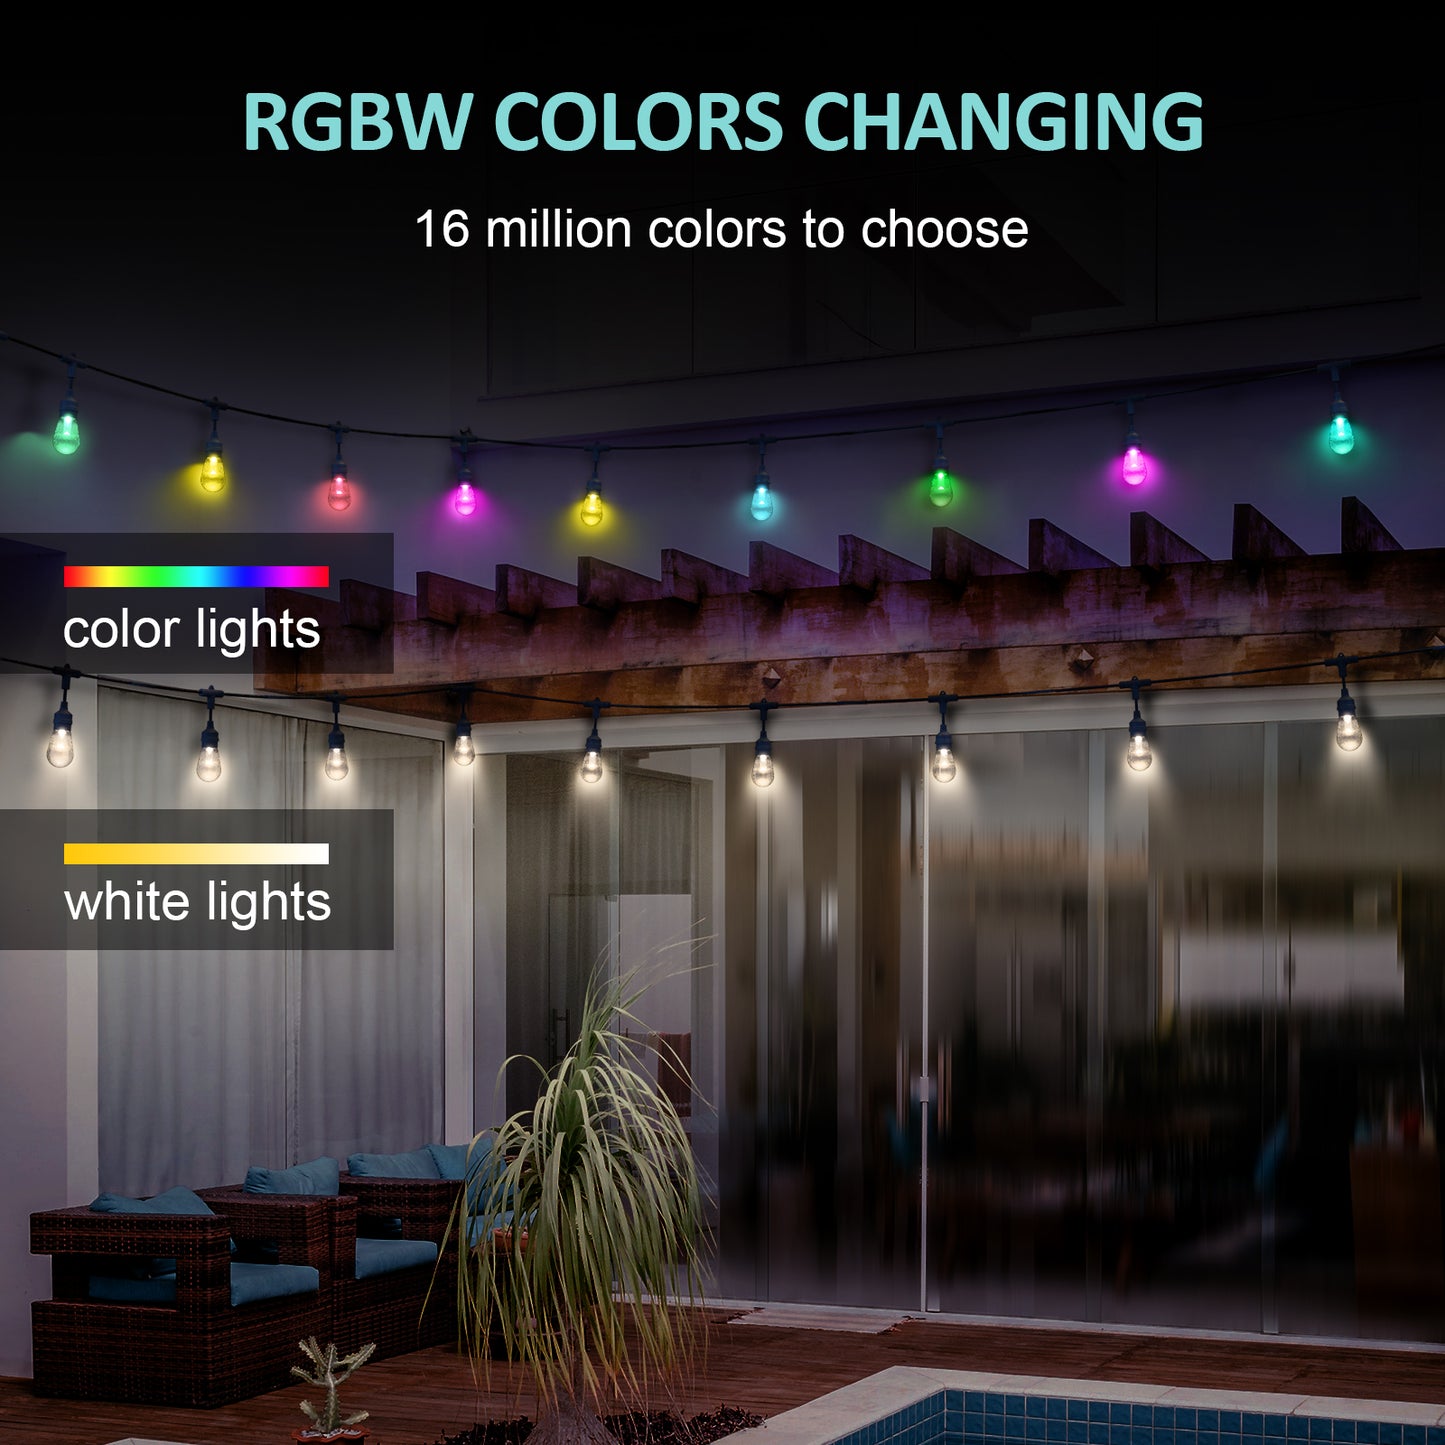 XMCOSY+ Smart Color Changing Outdoor String Lights